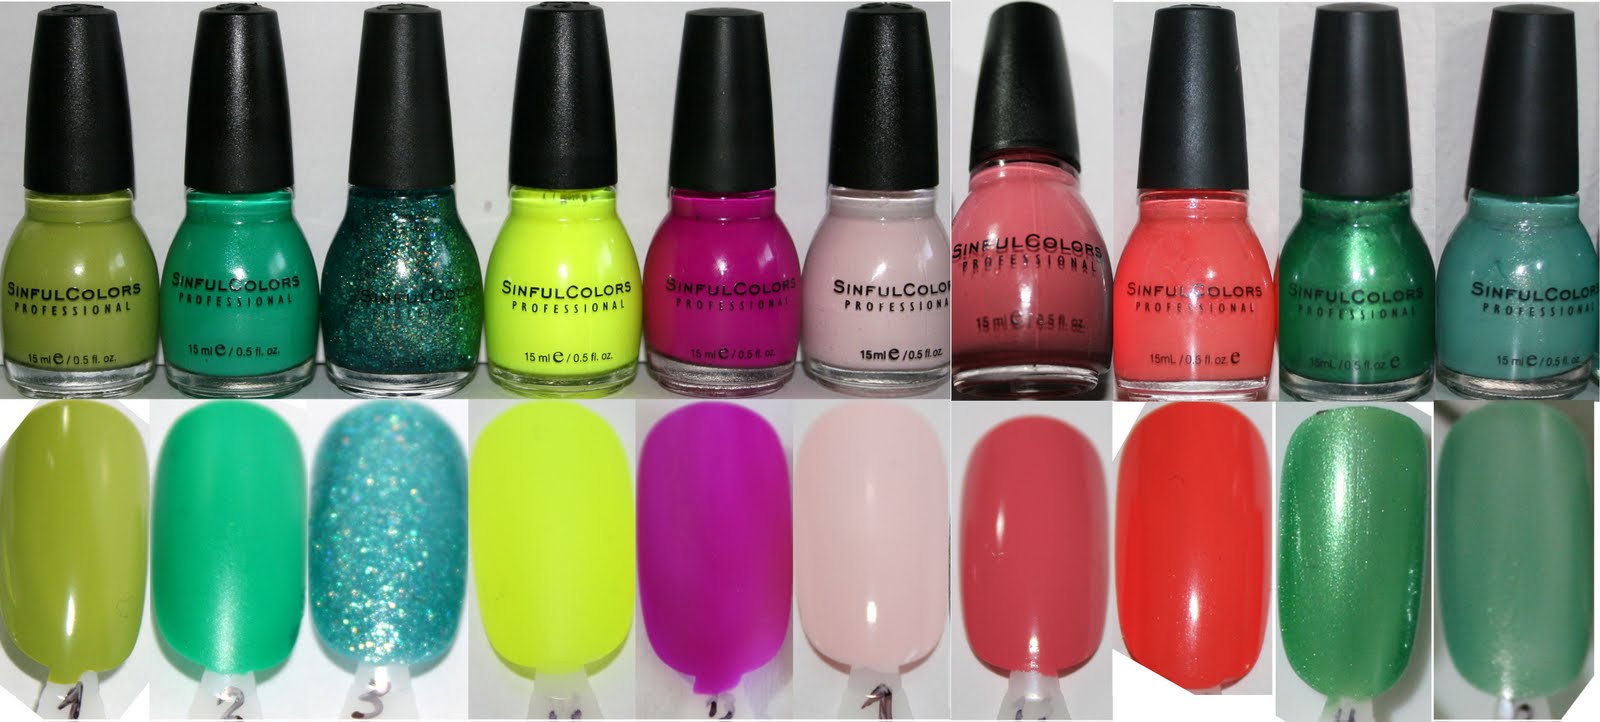 8. Sinful Colors Neutral Nail Polish Colors - wide 1